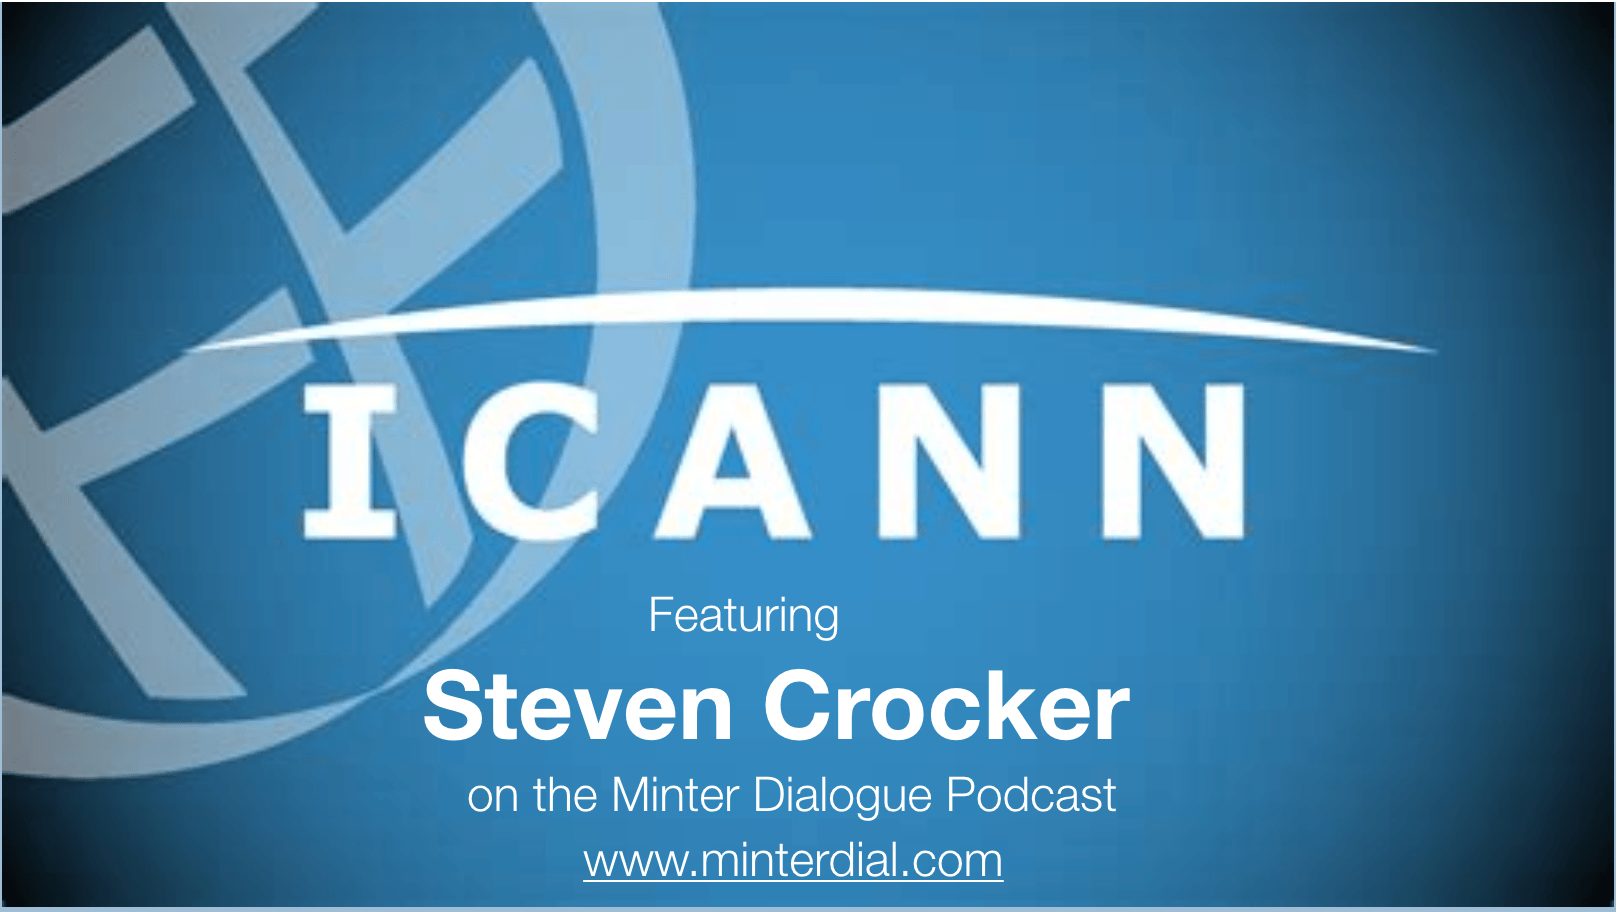 Up Close With A Founding Father Of The Internet: Dr. Stephen Crocker